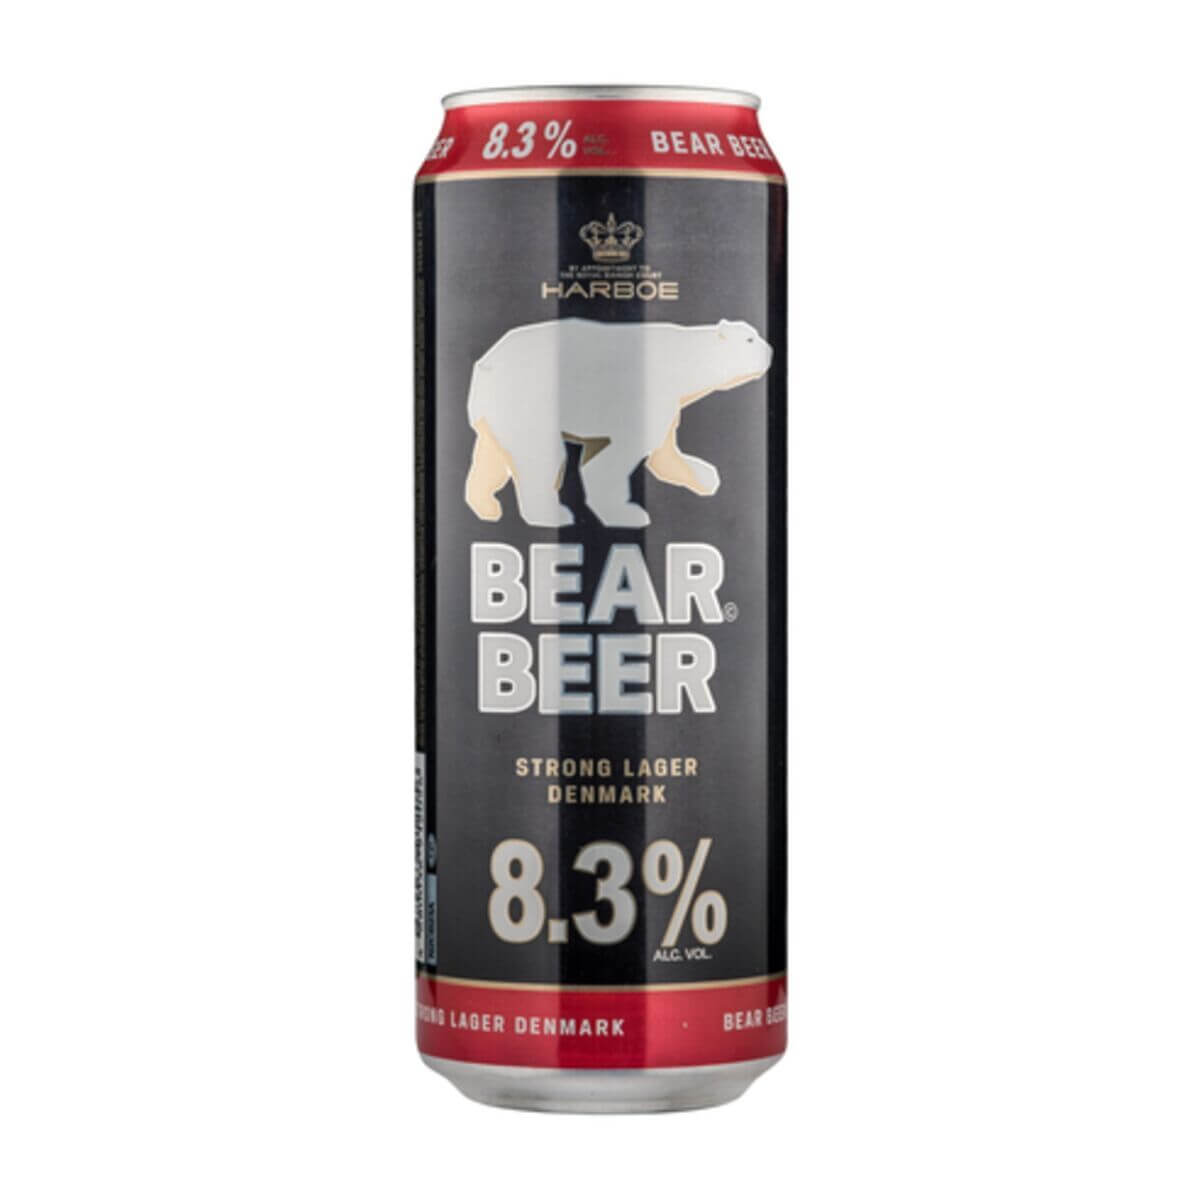 Strong beer. Пиво Bear Beer strong Lager светлое. Пиво светлое Bear Beer strong Lager 0.45 л. Беар бир Стронг лагер. Bear Beer strong Lager производитель.